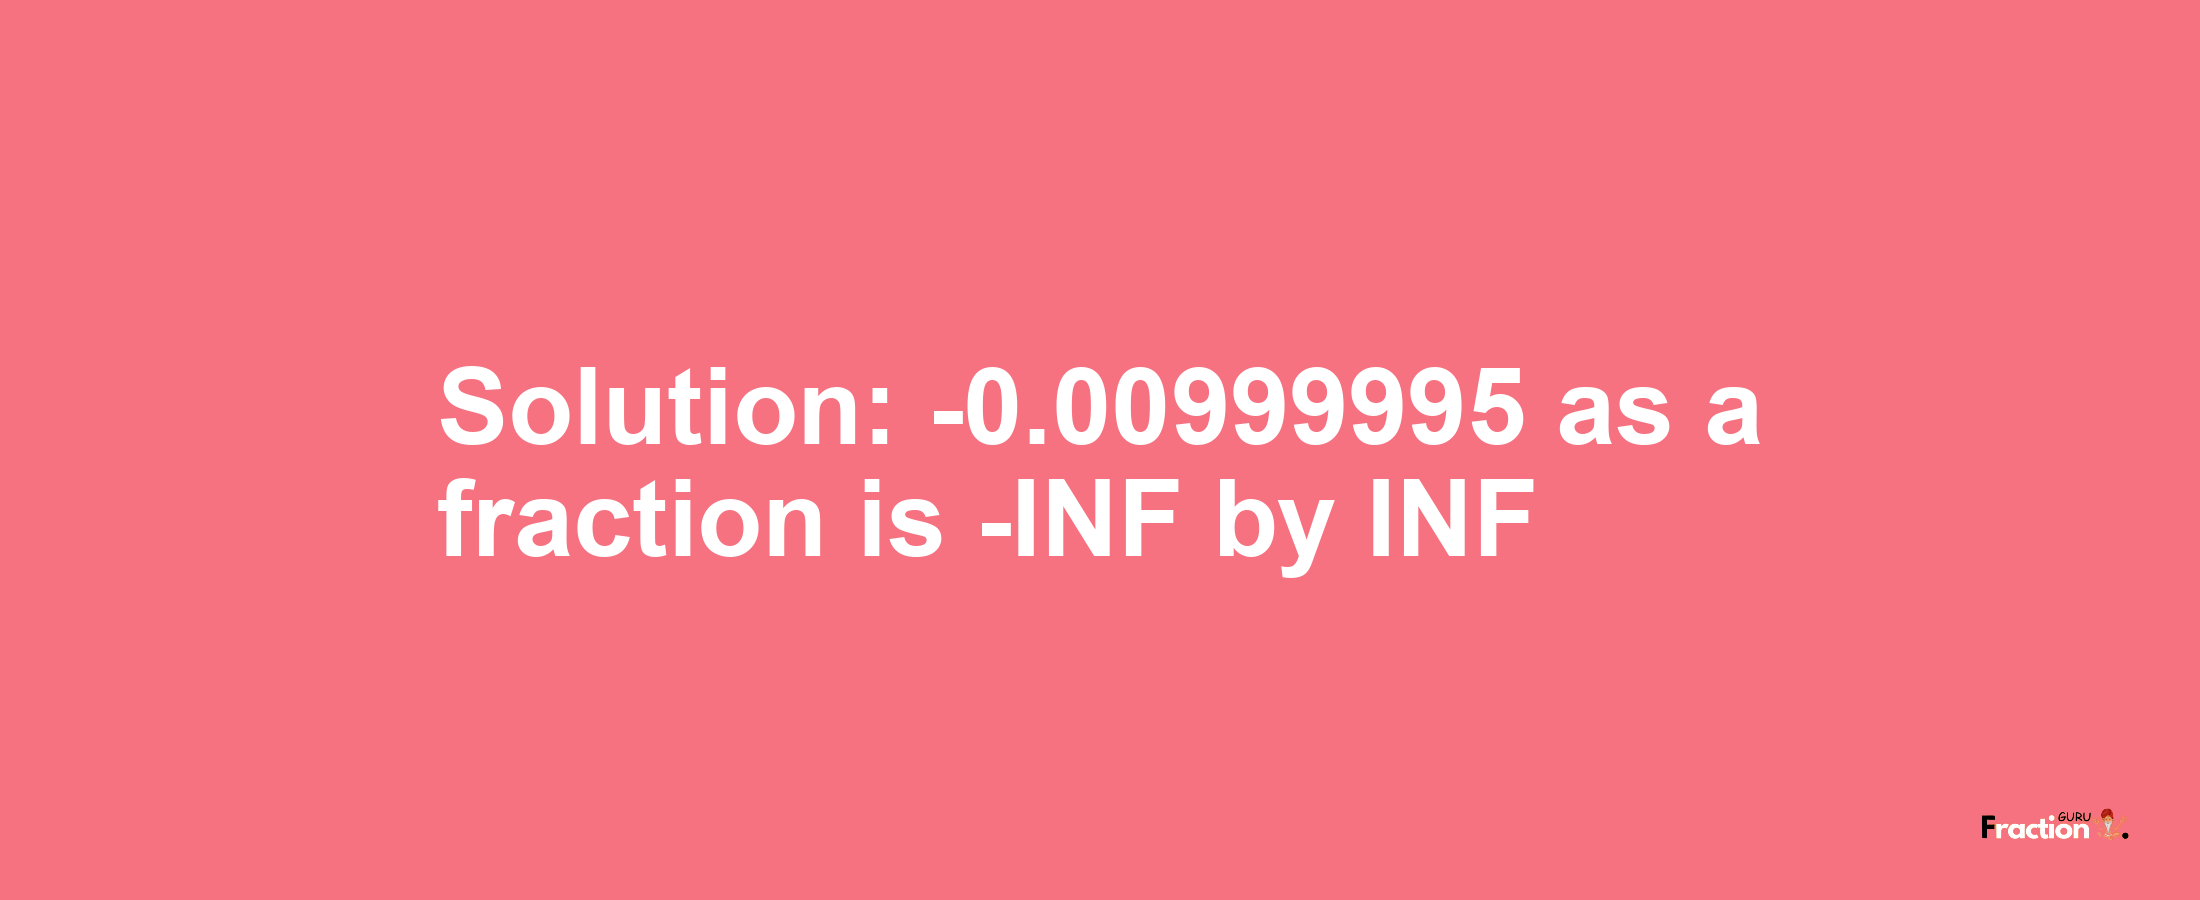 Solution:-0.00999995 as a fraction is -INF/INF